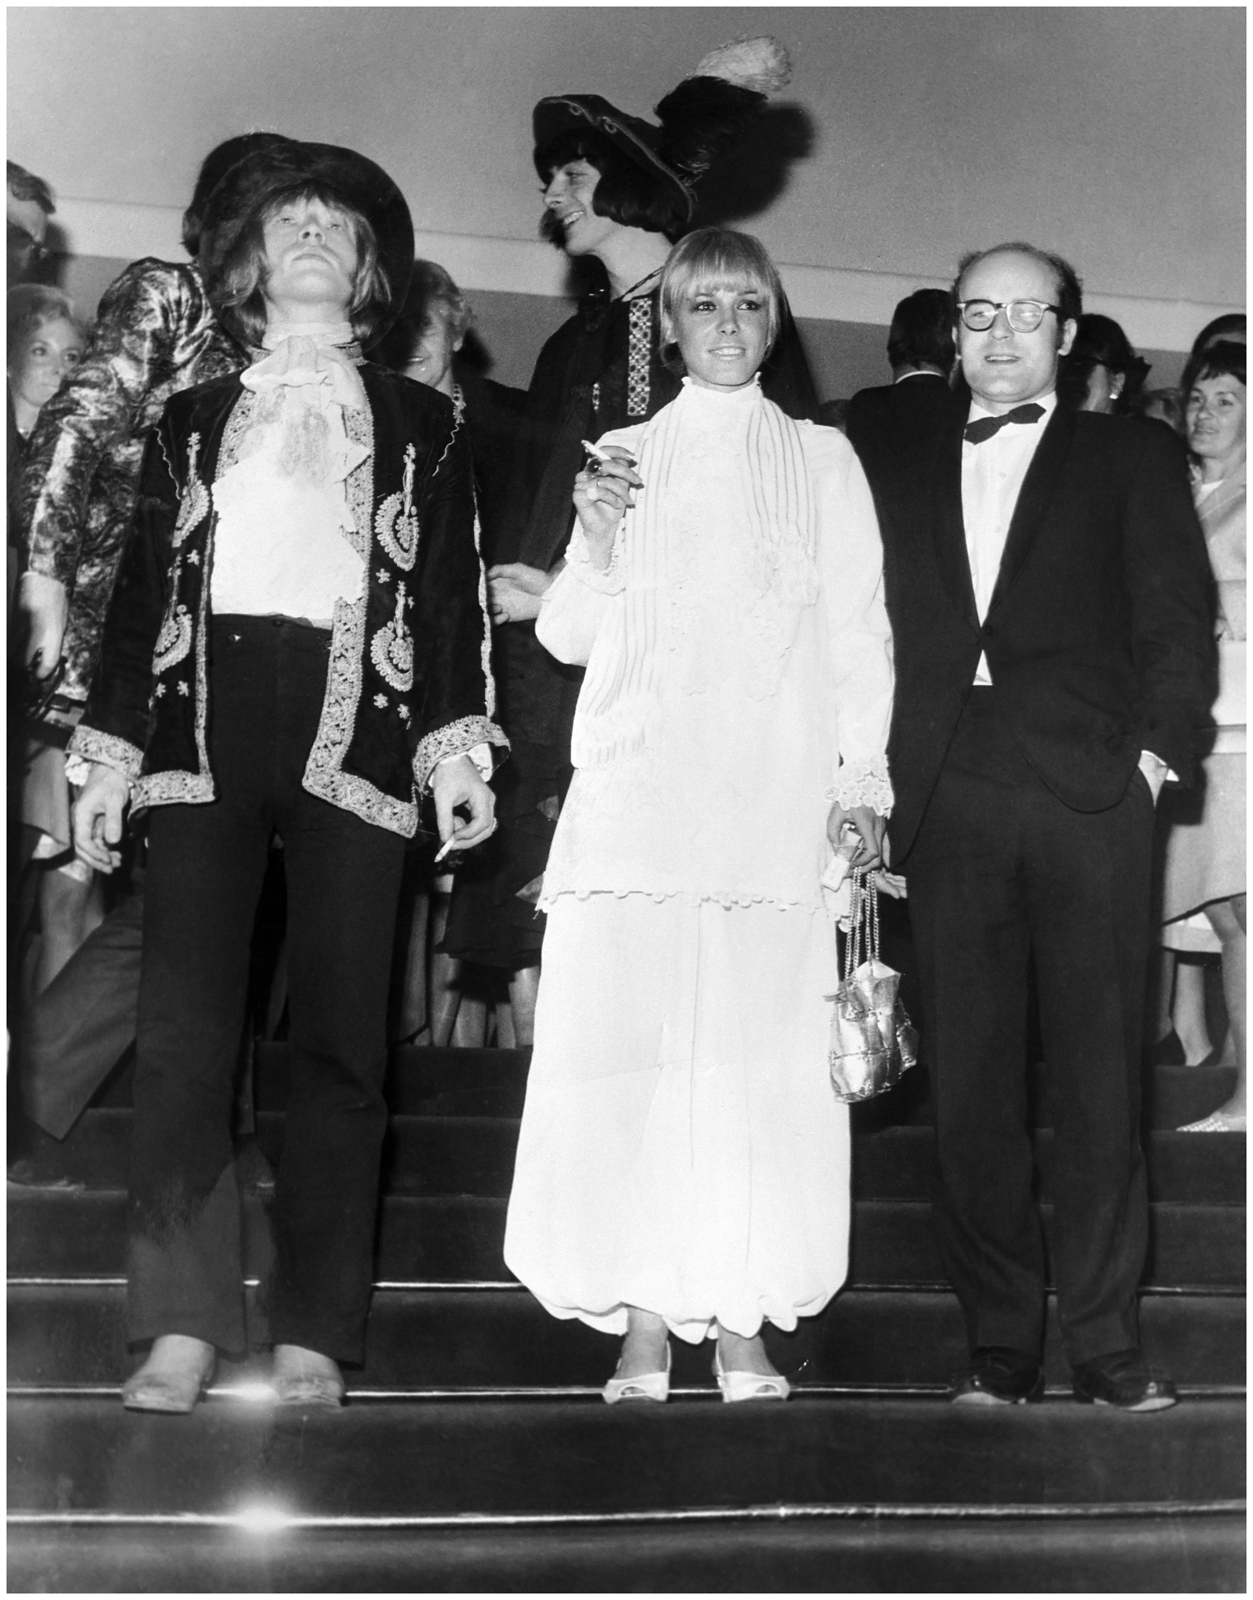 Brian Jones, of the rock group the Rolling Stones, and his girlfriend, actress Anita Pallenberg arriving at a screening of Mord Und Totschlag (A Degree of Murder) during the Cannes Film Festival, pic